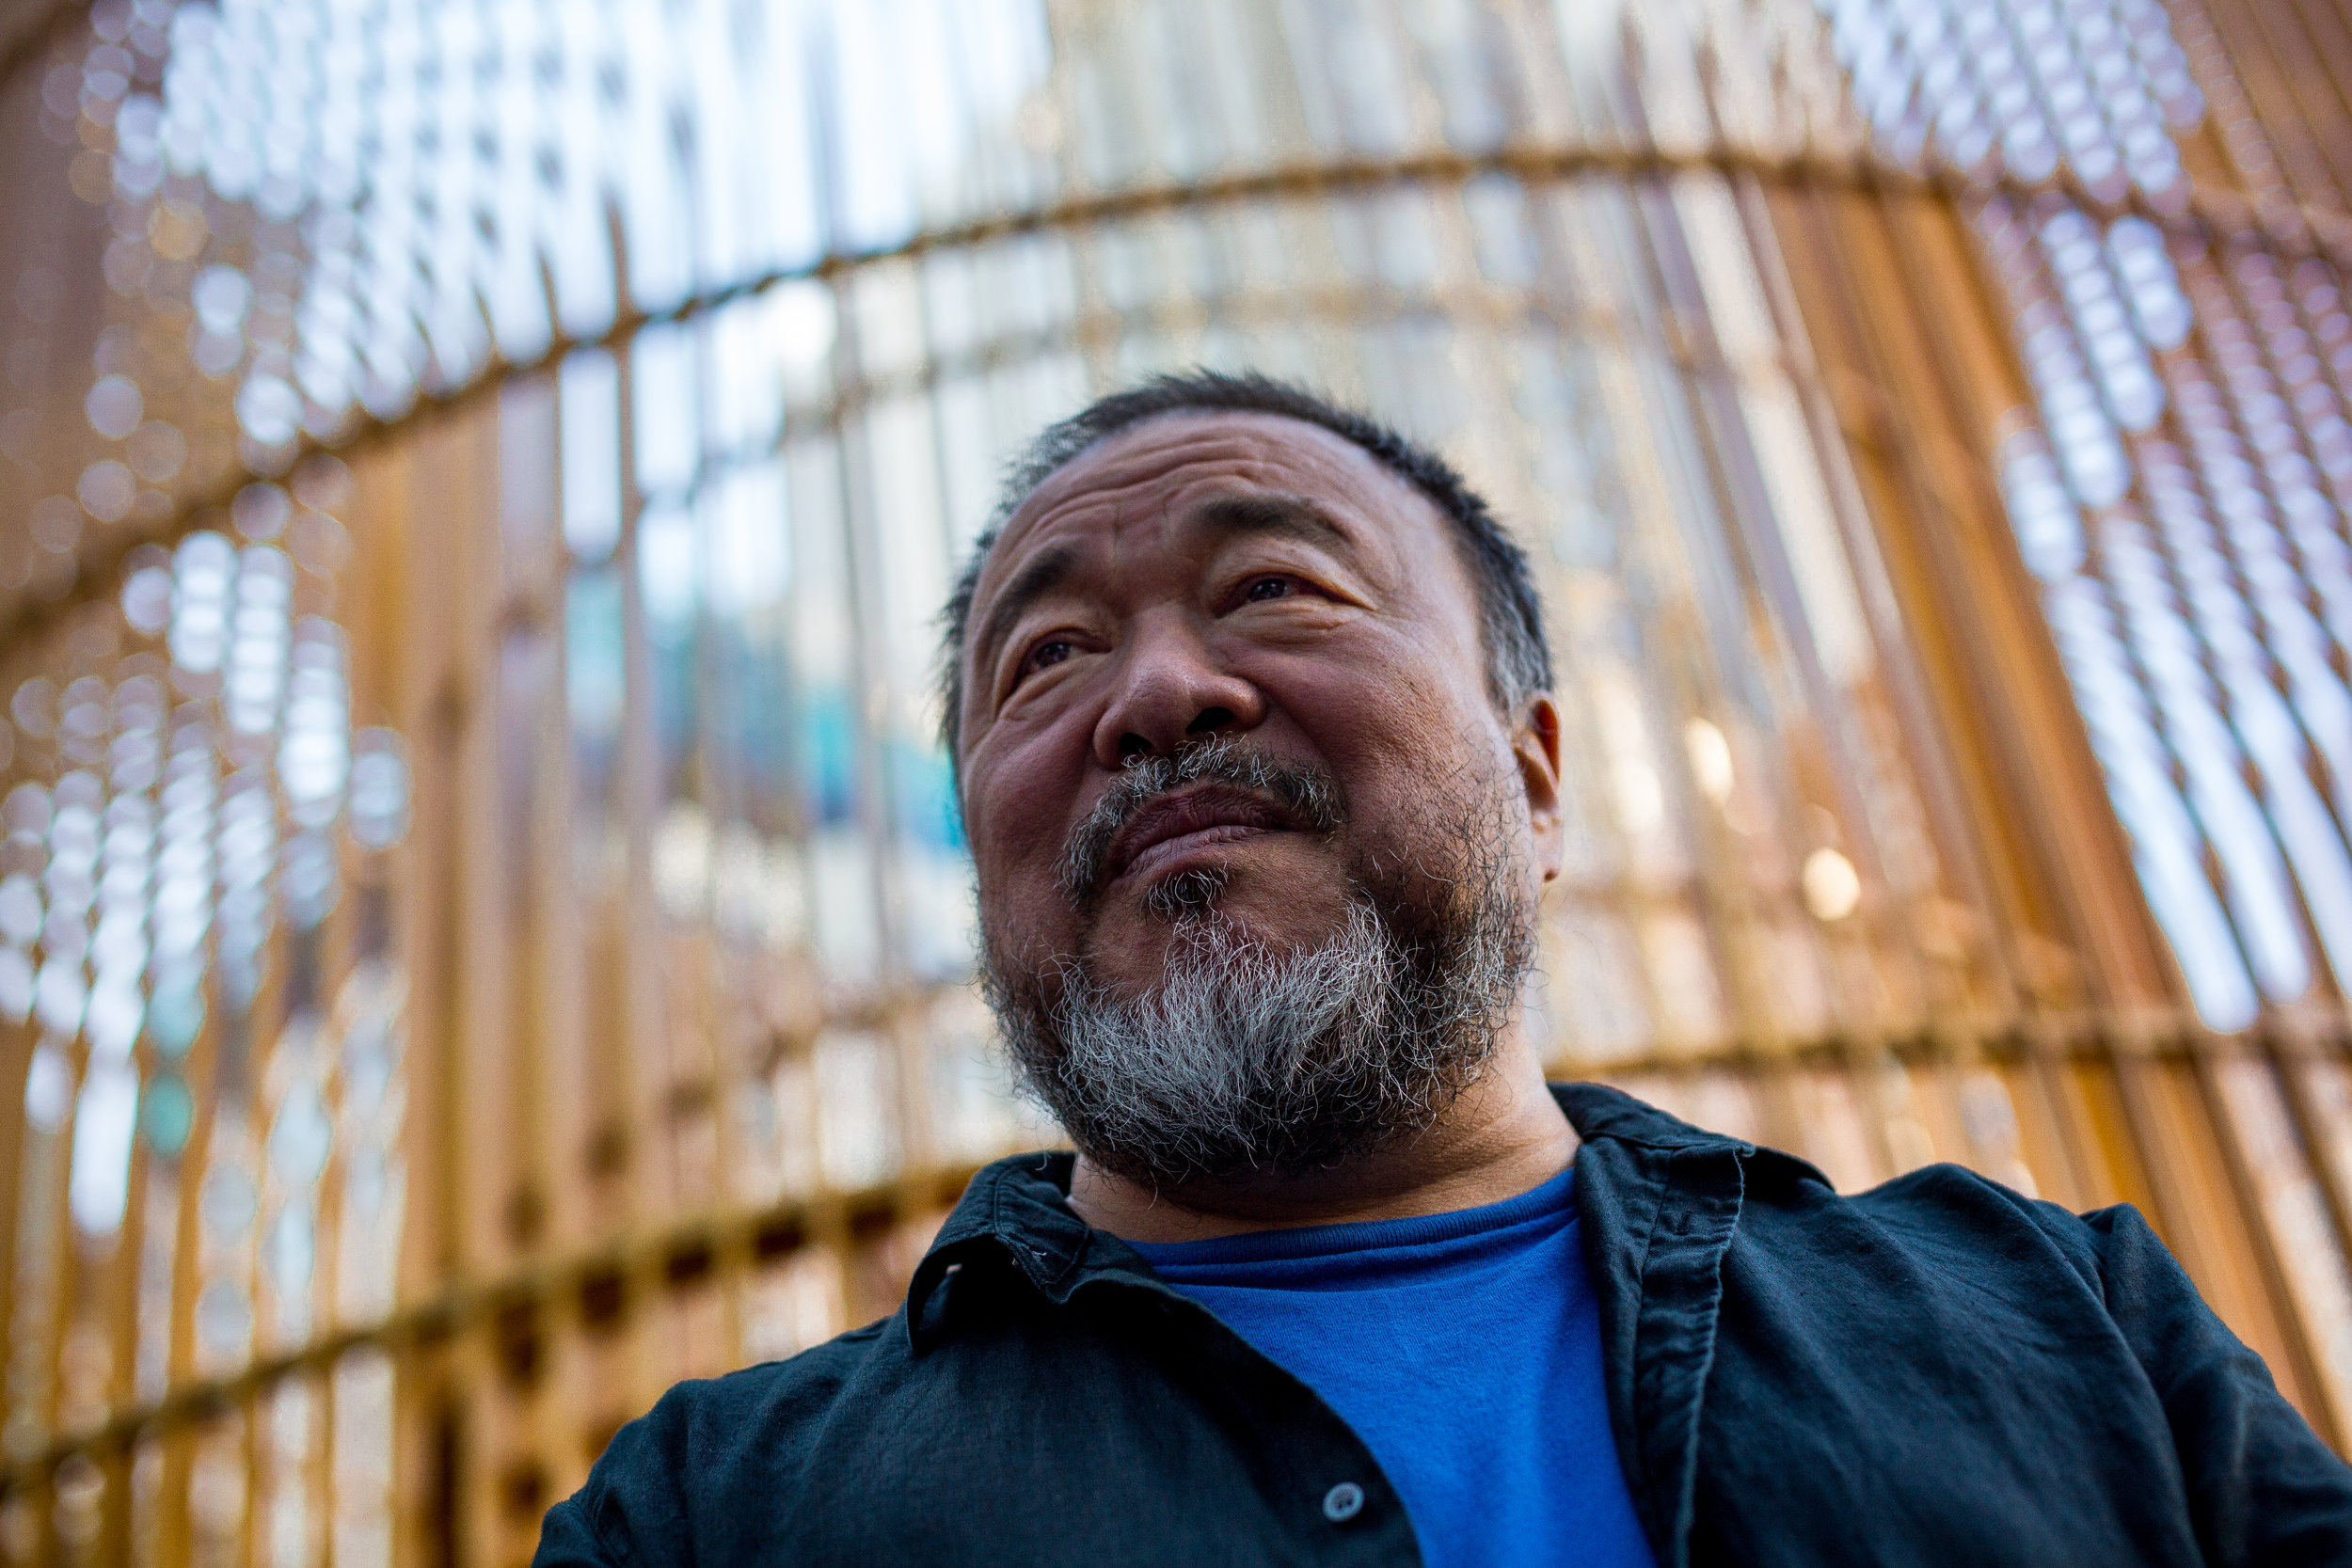  Chinese artist and dissident Ai Weiwei introduces a new 2017 installation in Central Park. 